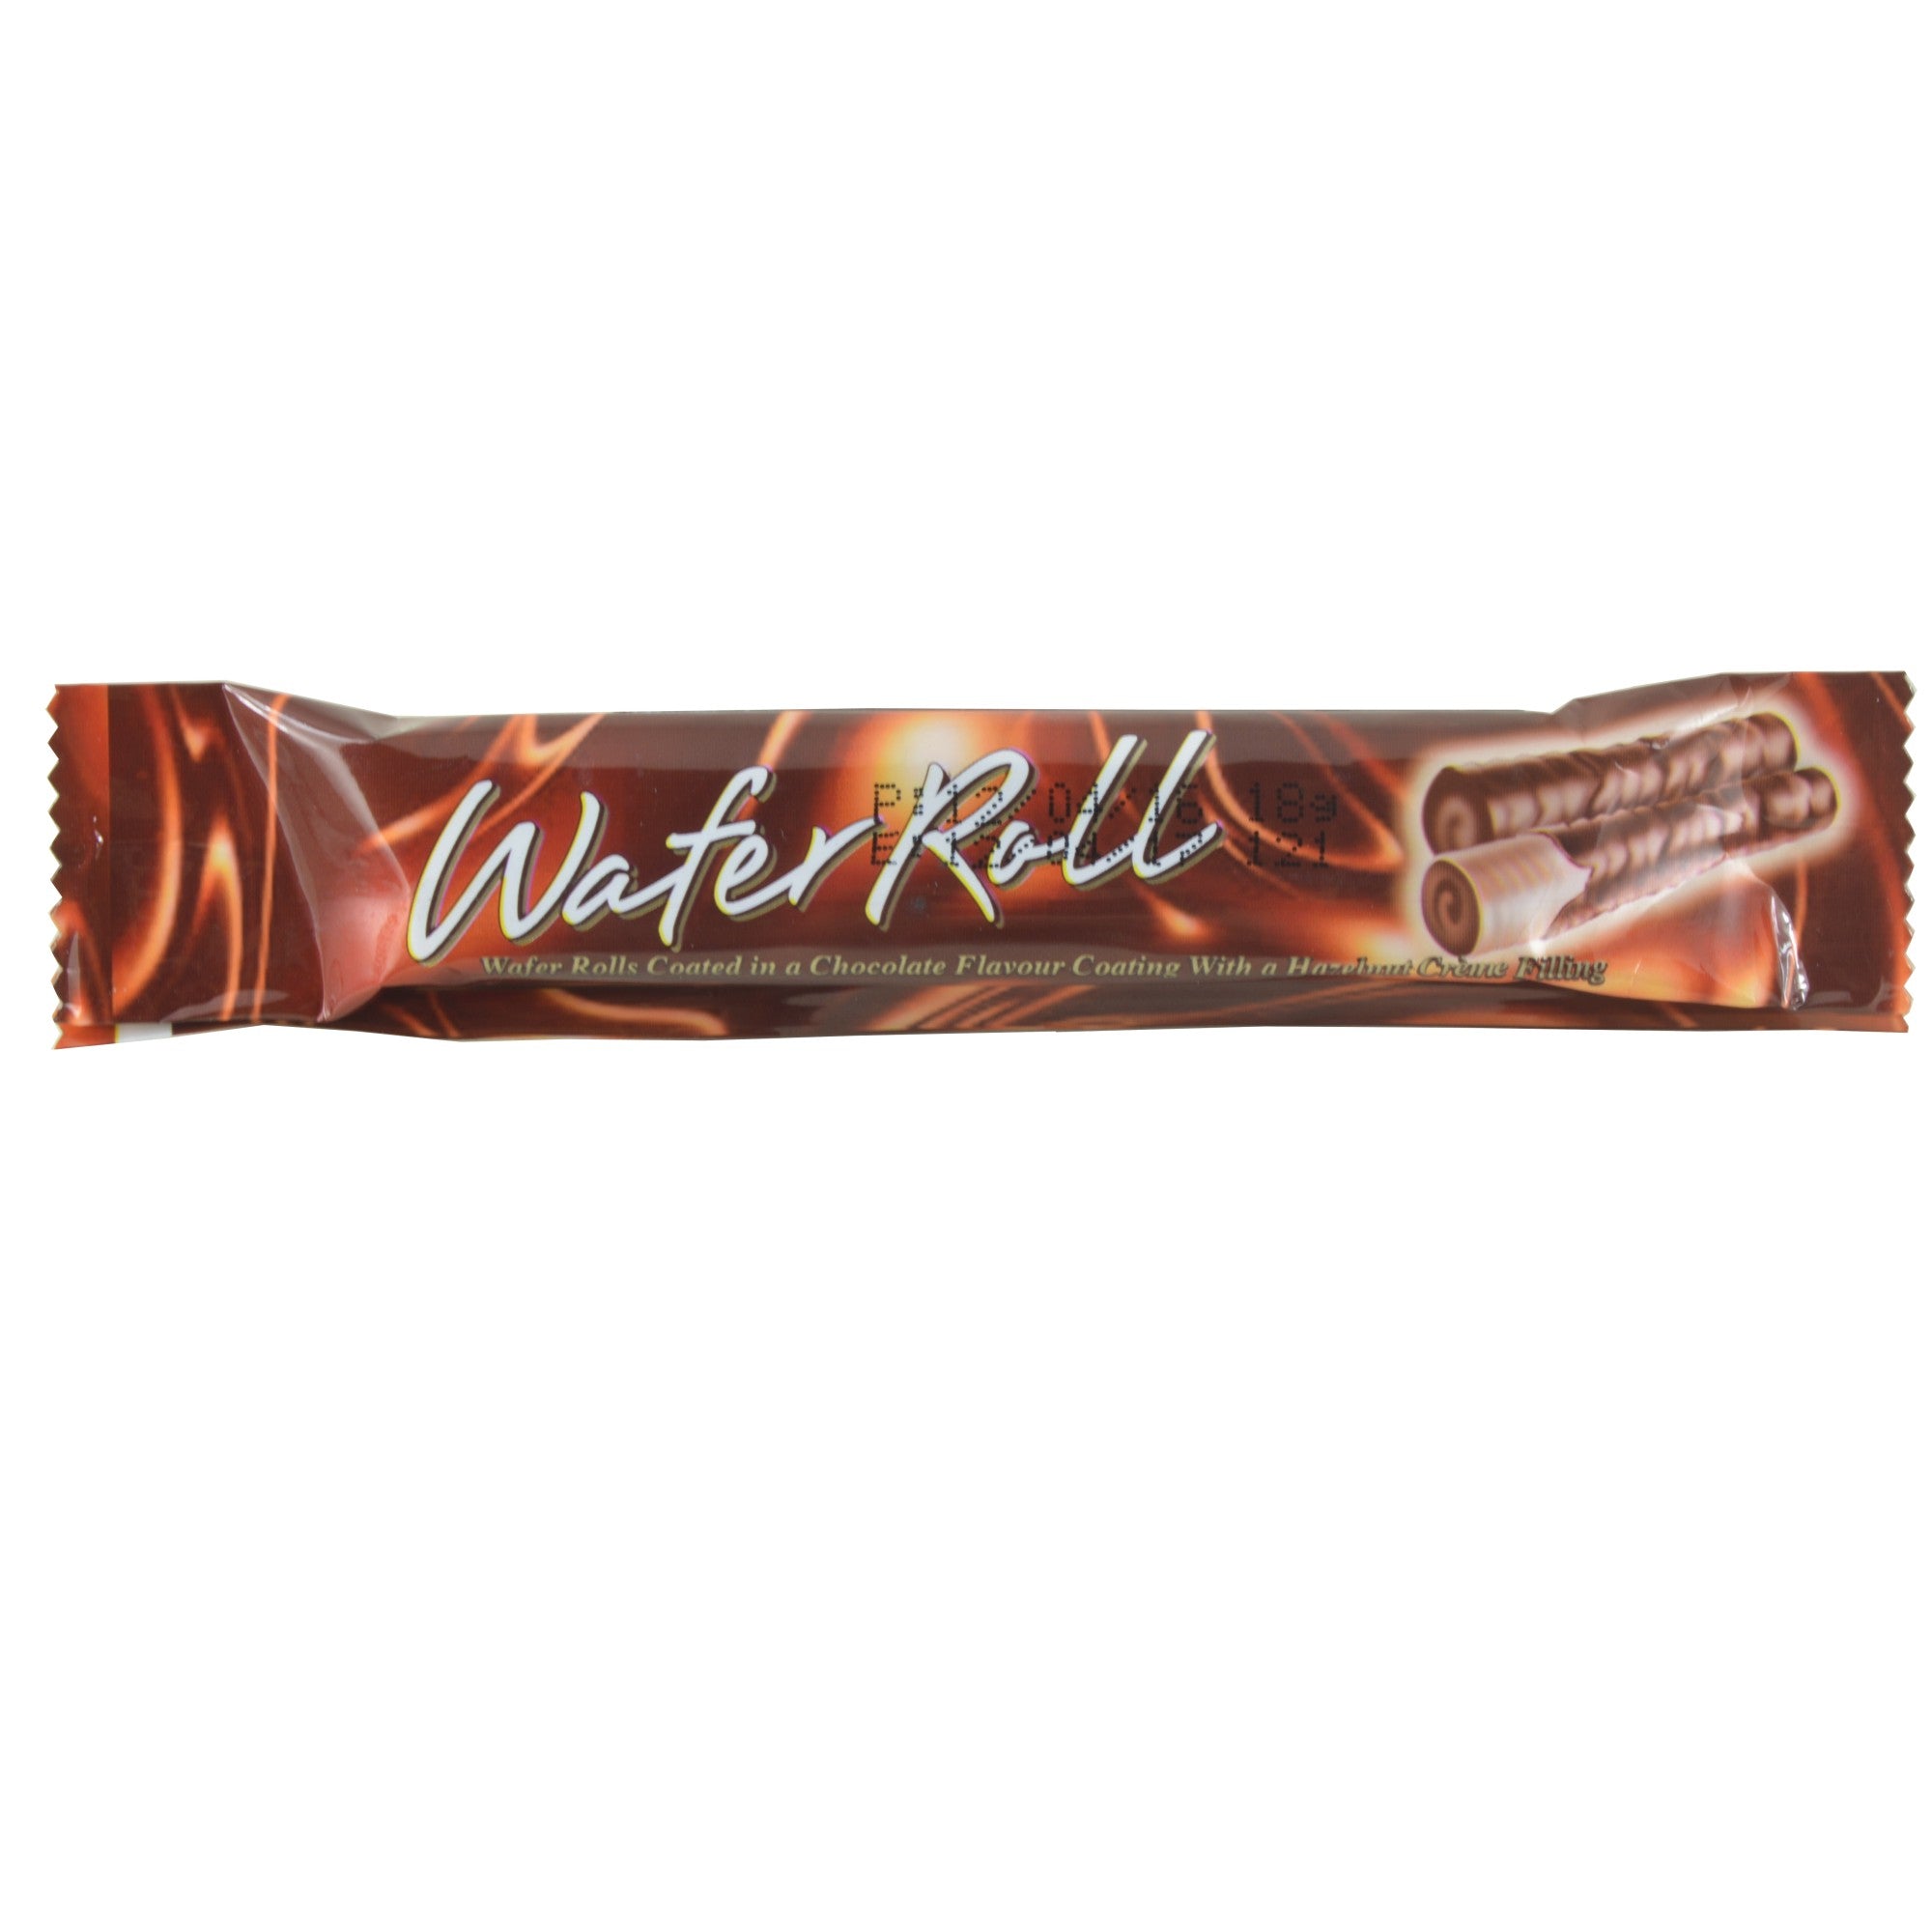 Pimlico Chocolate Wafer Rolls twinpack 18g 4 for £1 (72g)